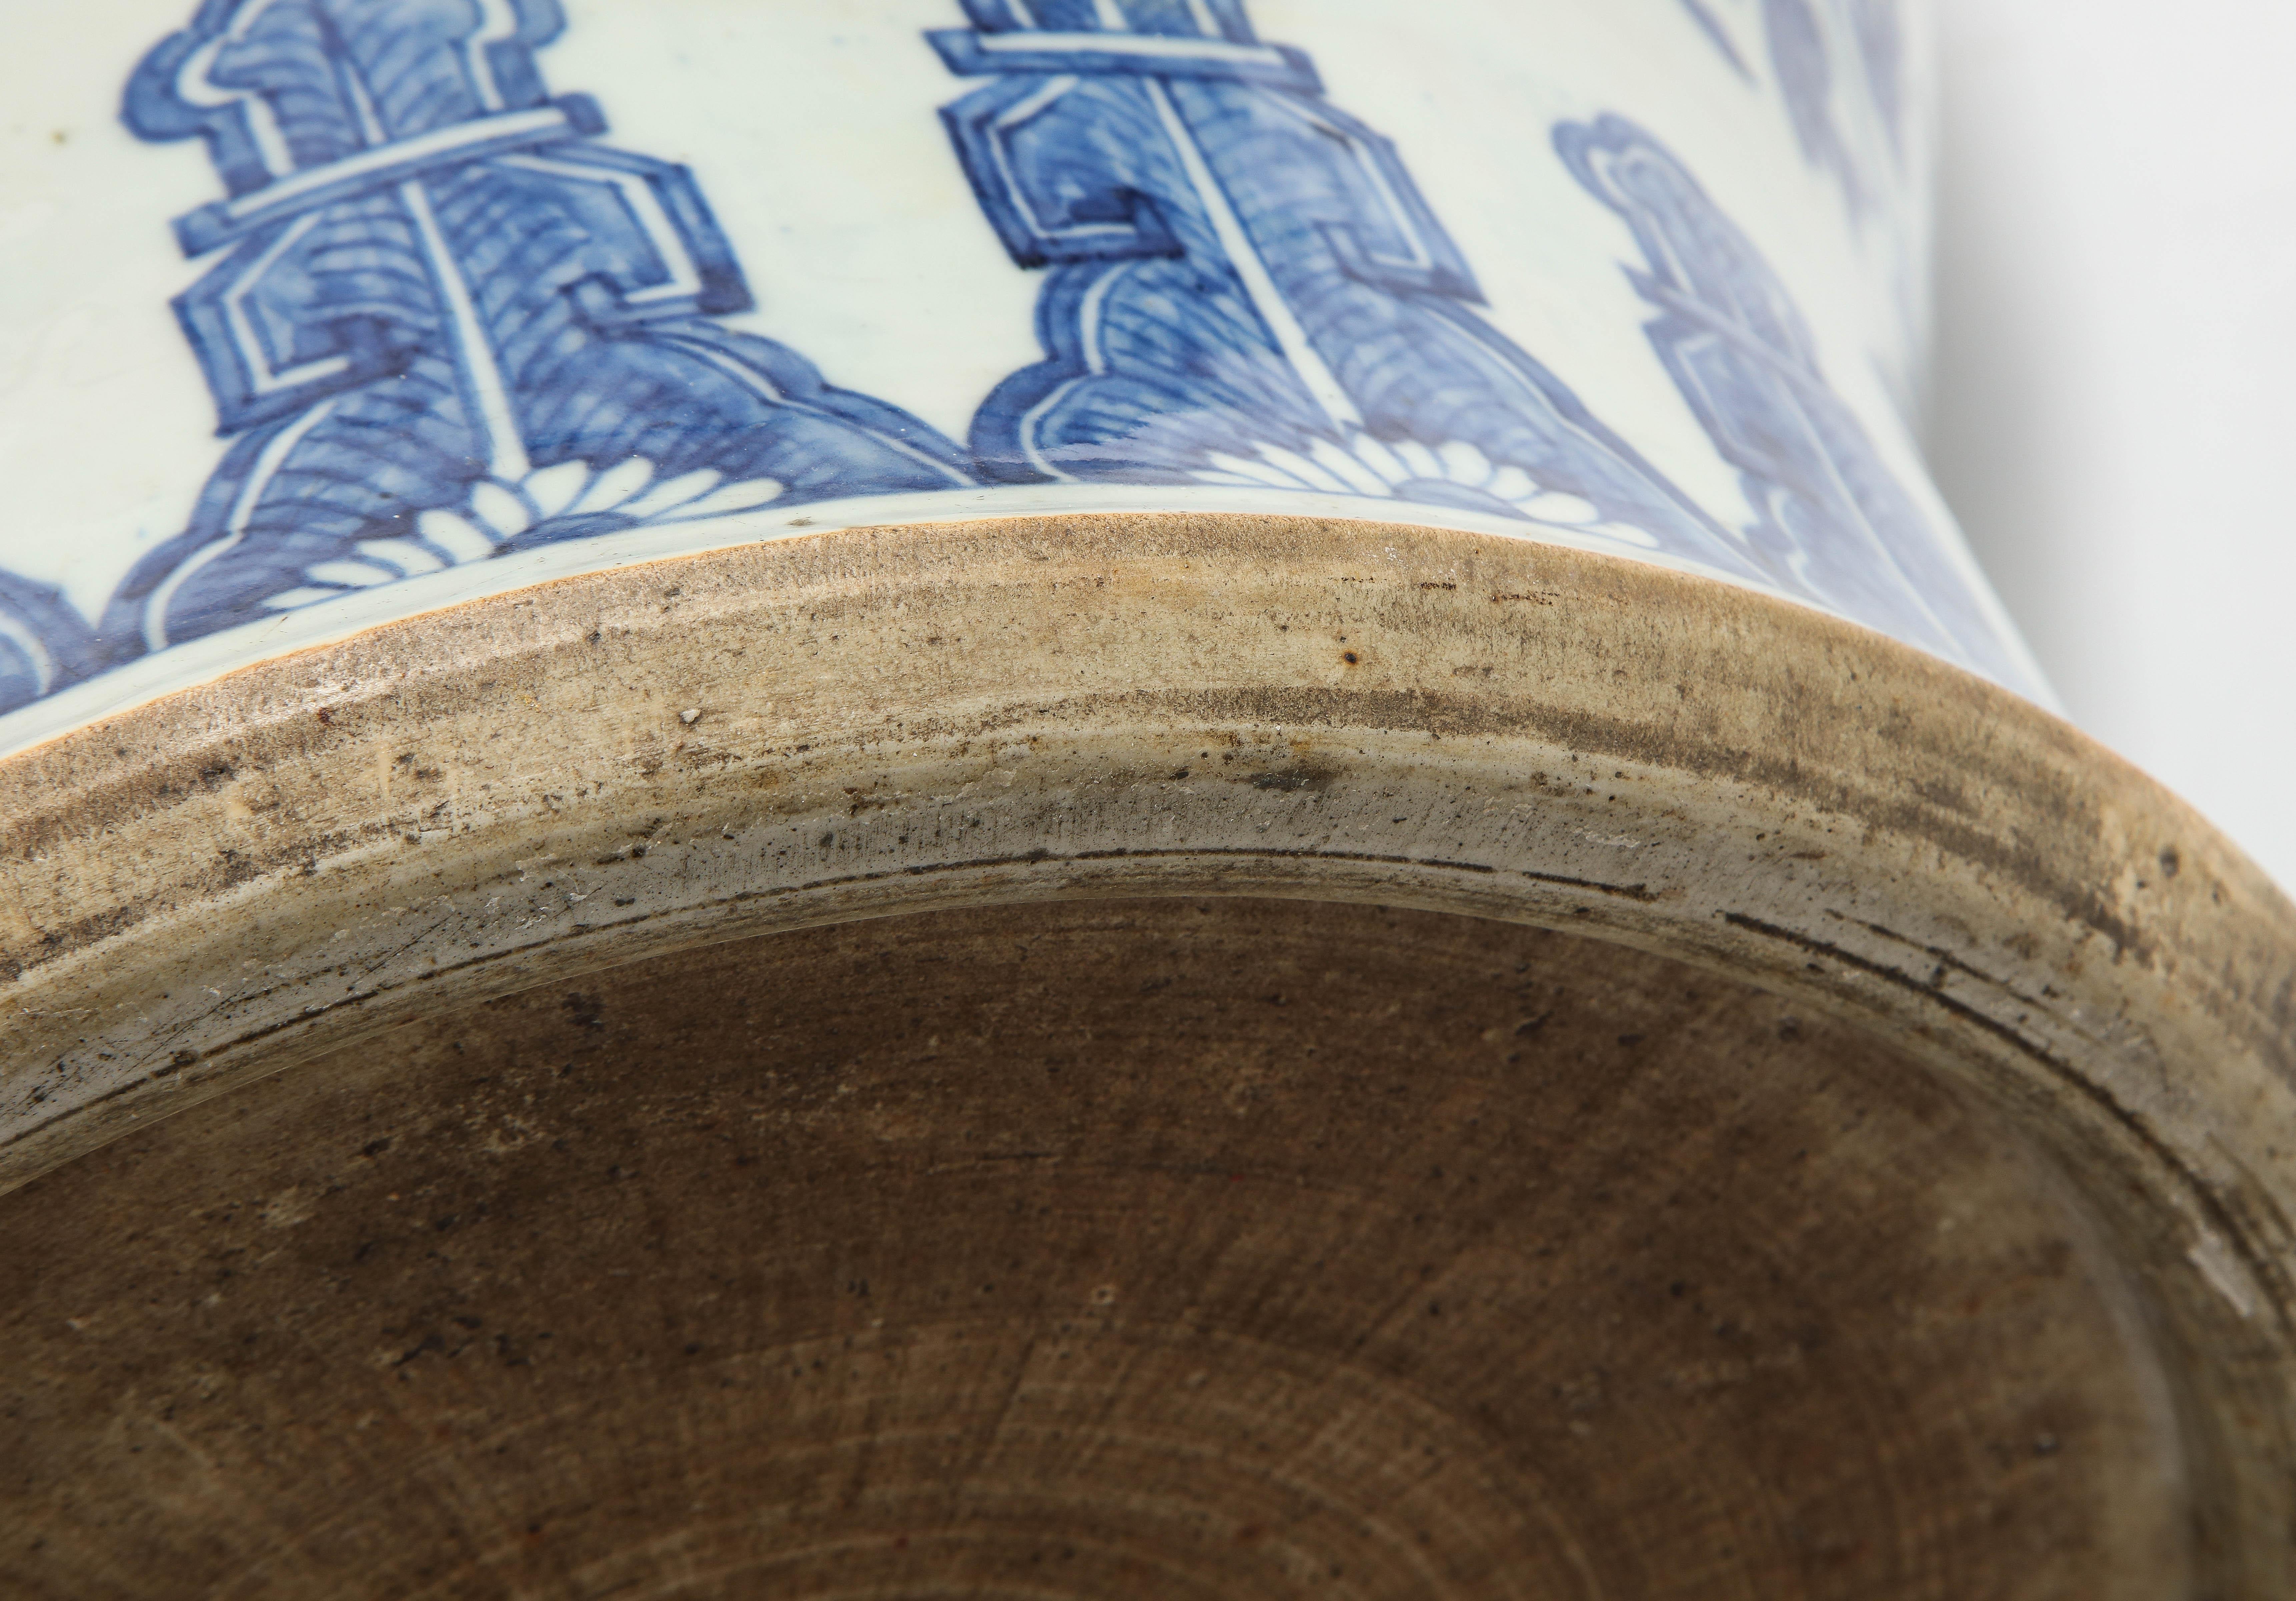 Pair of 19th Century Qing Dynasty Chinese Blue and White Vases Turned to Lamps For Sale 3